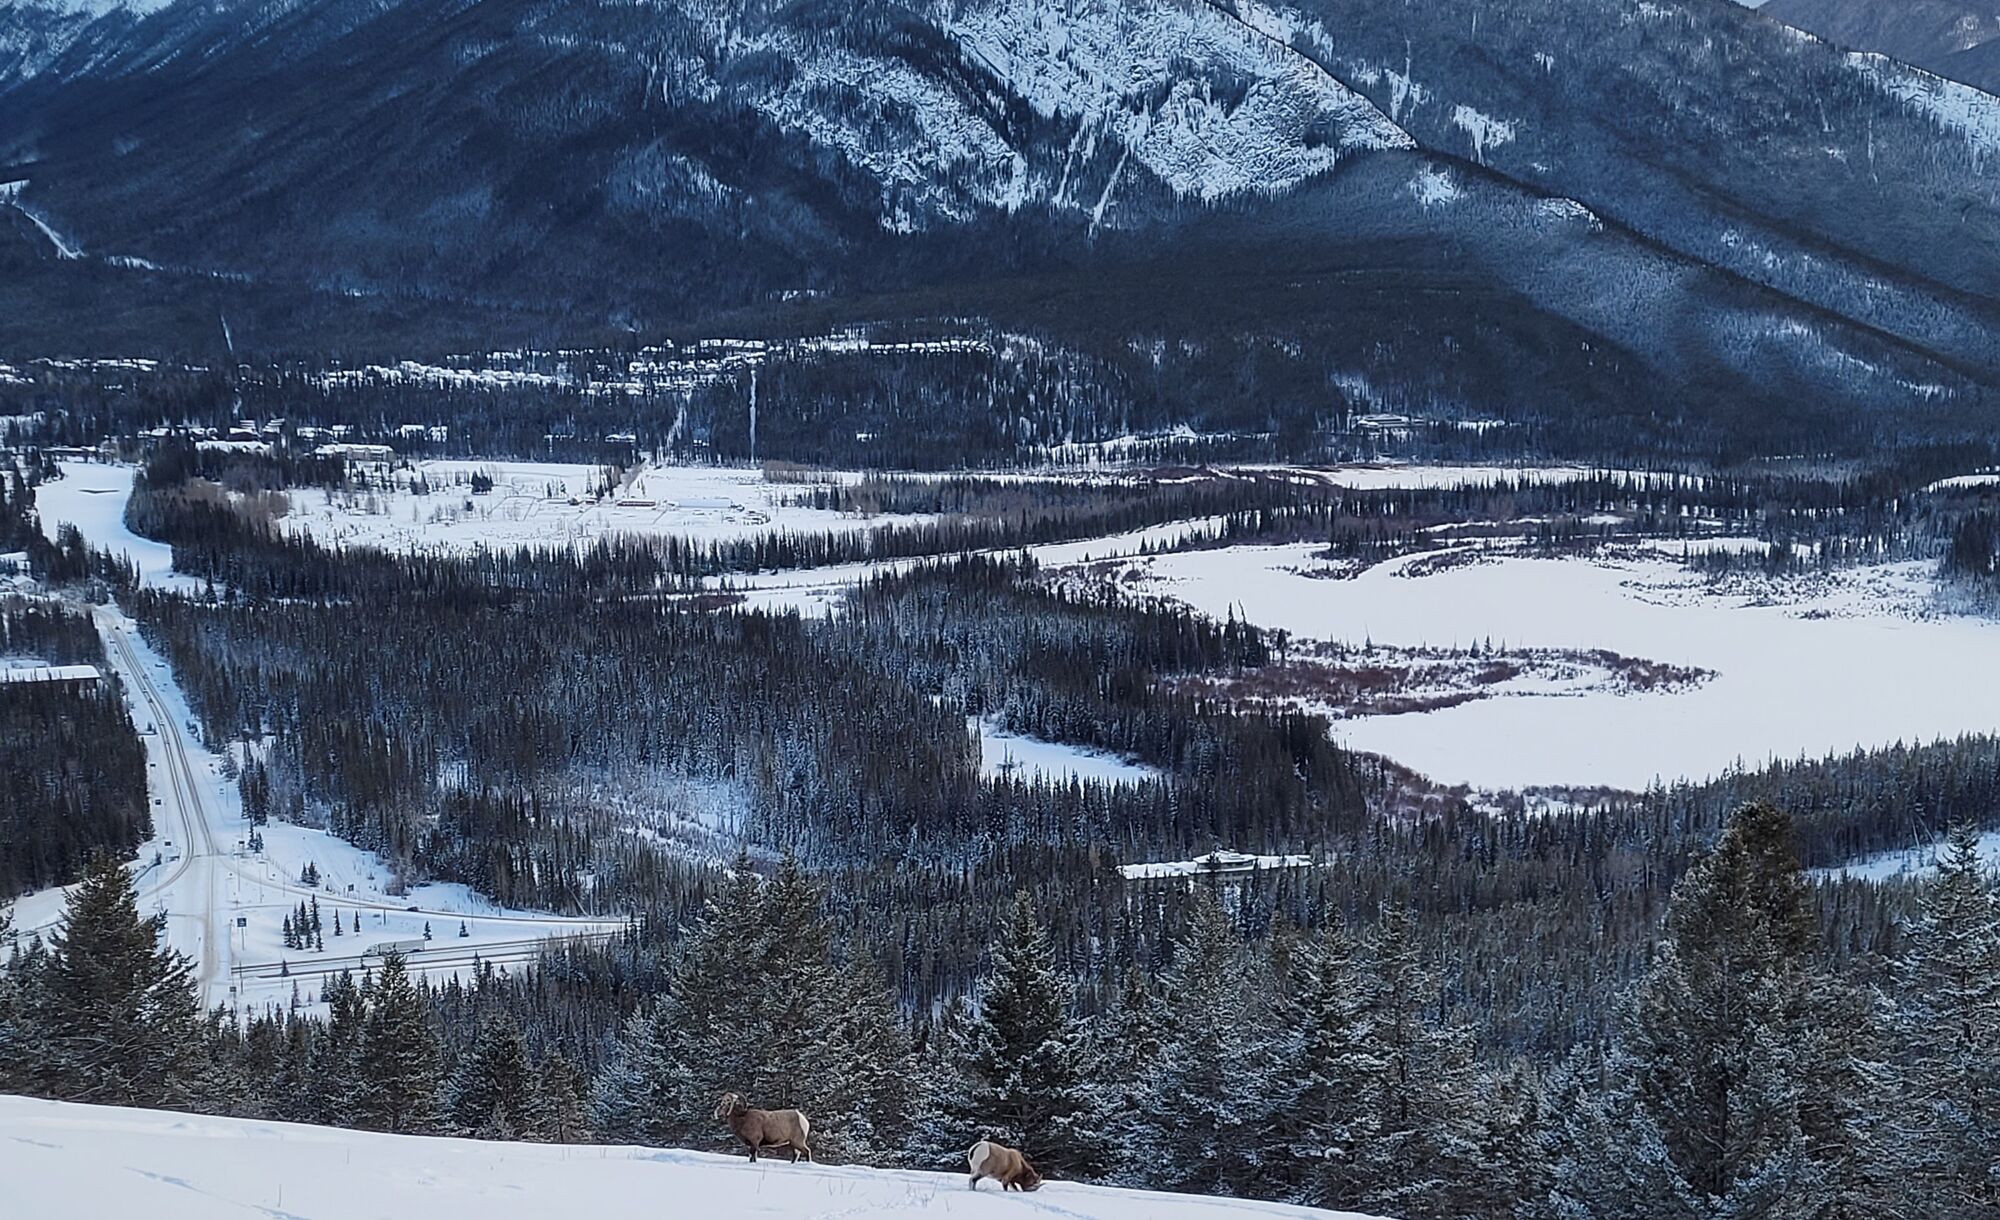 Mountain goats at the Norquay Viewpoint overlooking the Banff Townsite in Banff National Park.